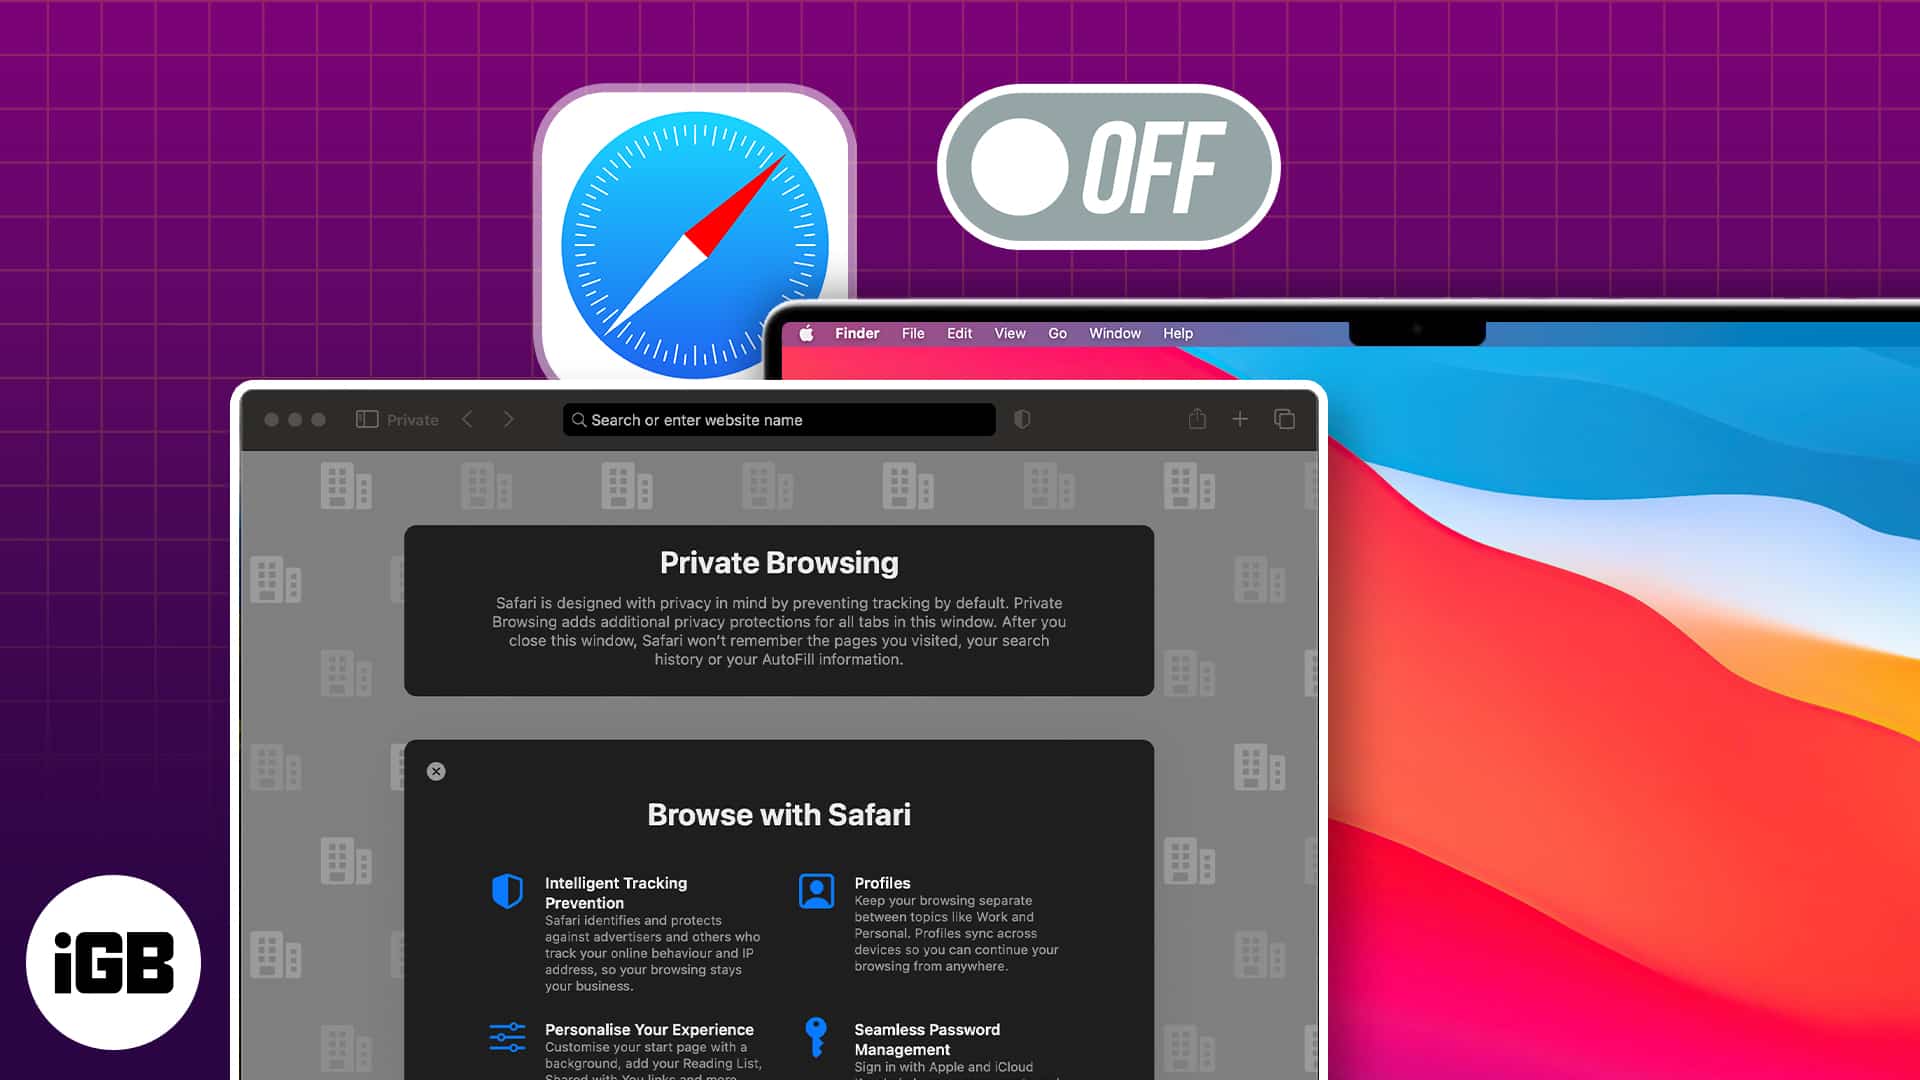 How to disable private browsing in safari on mac